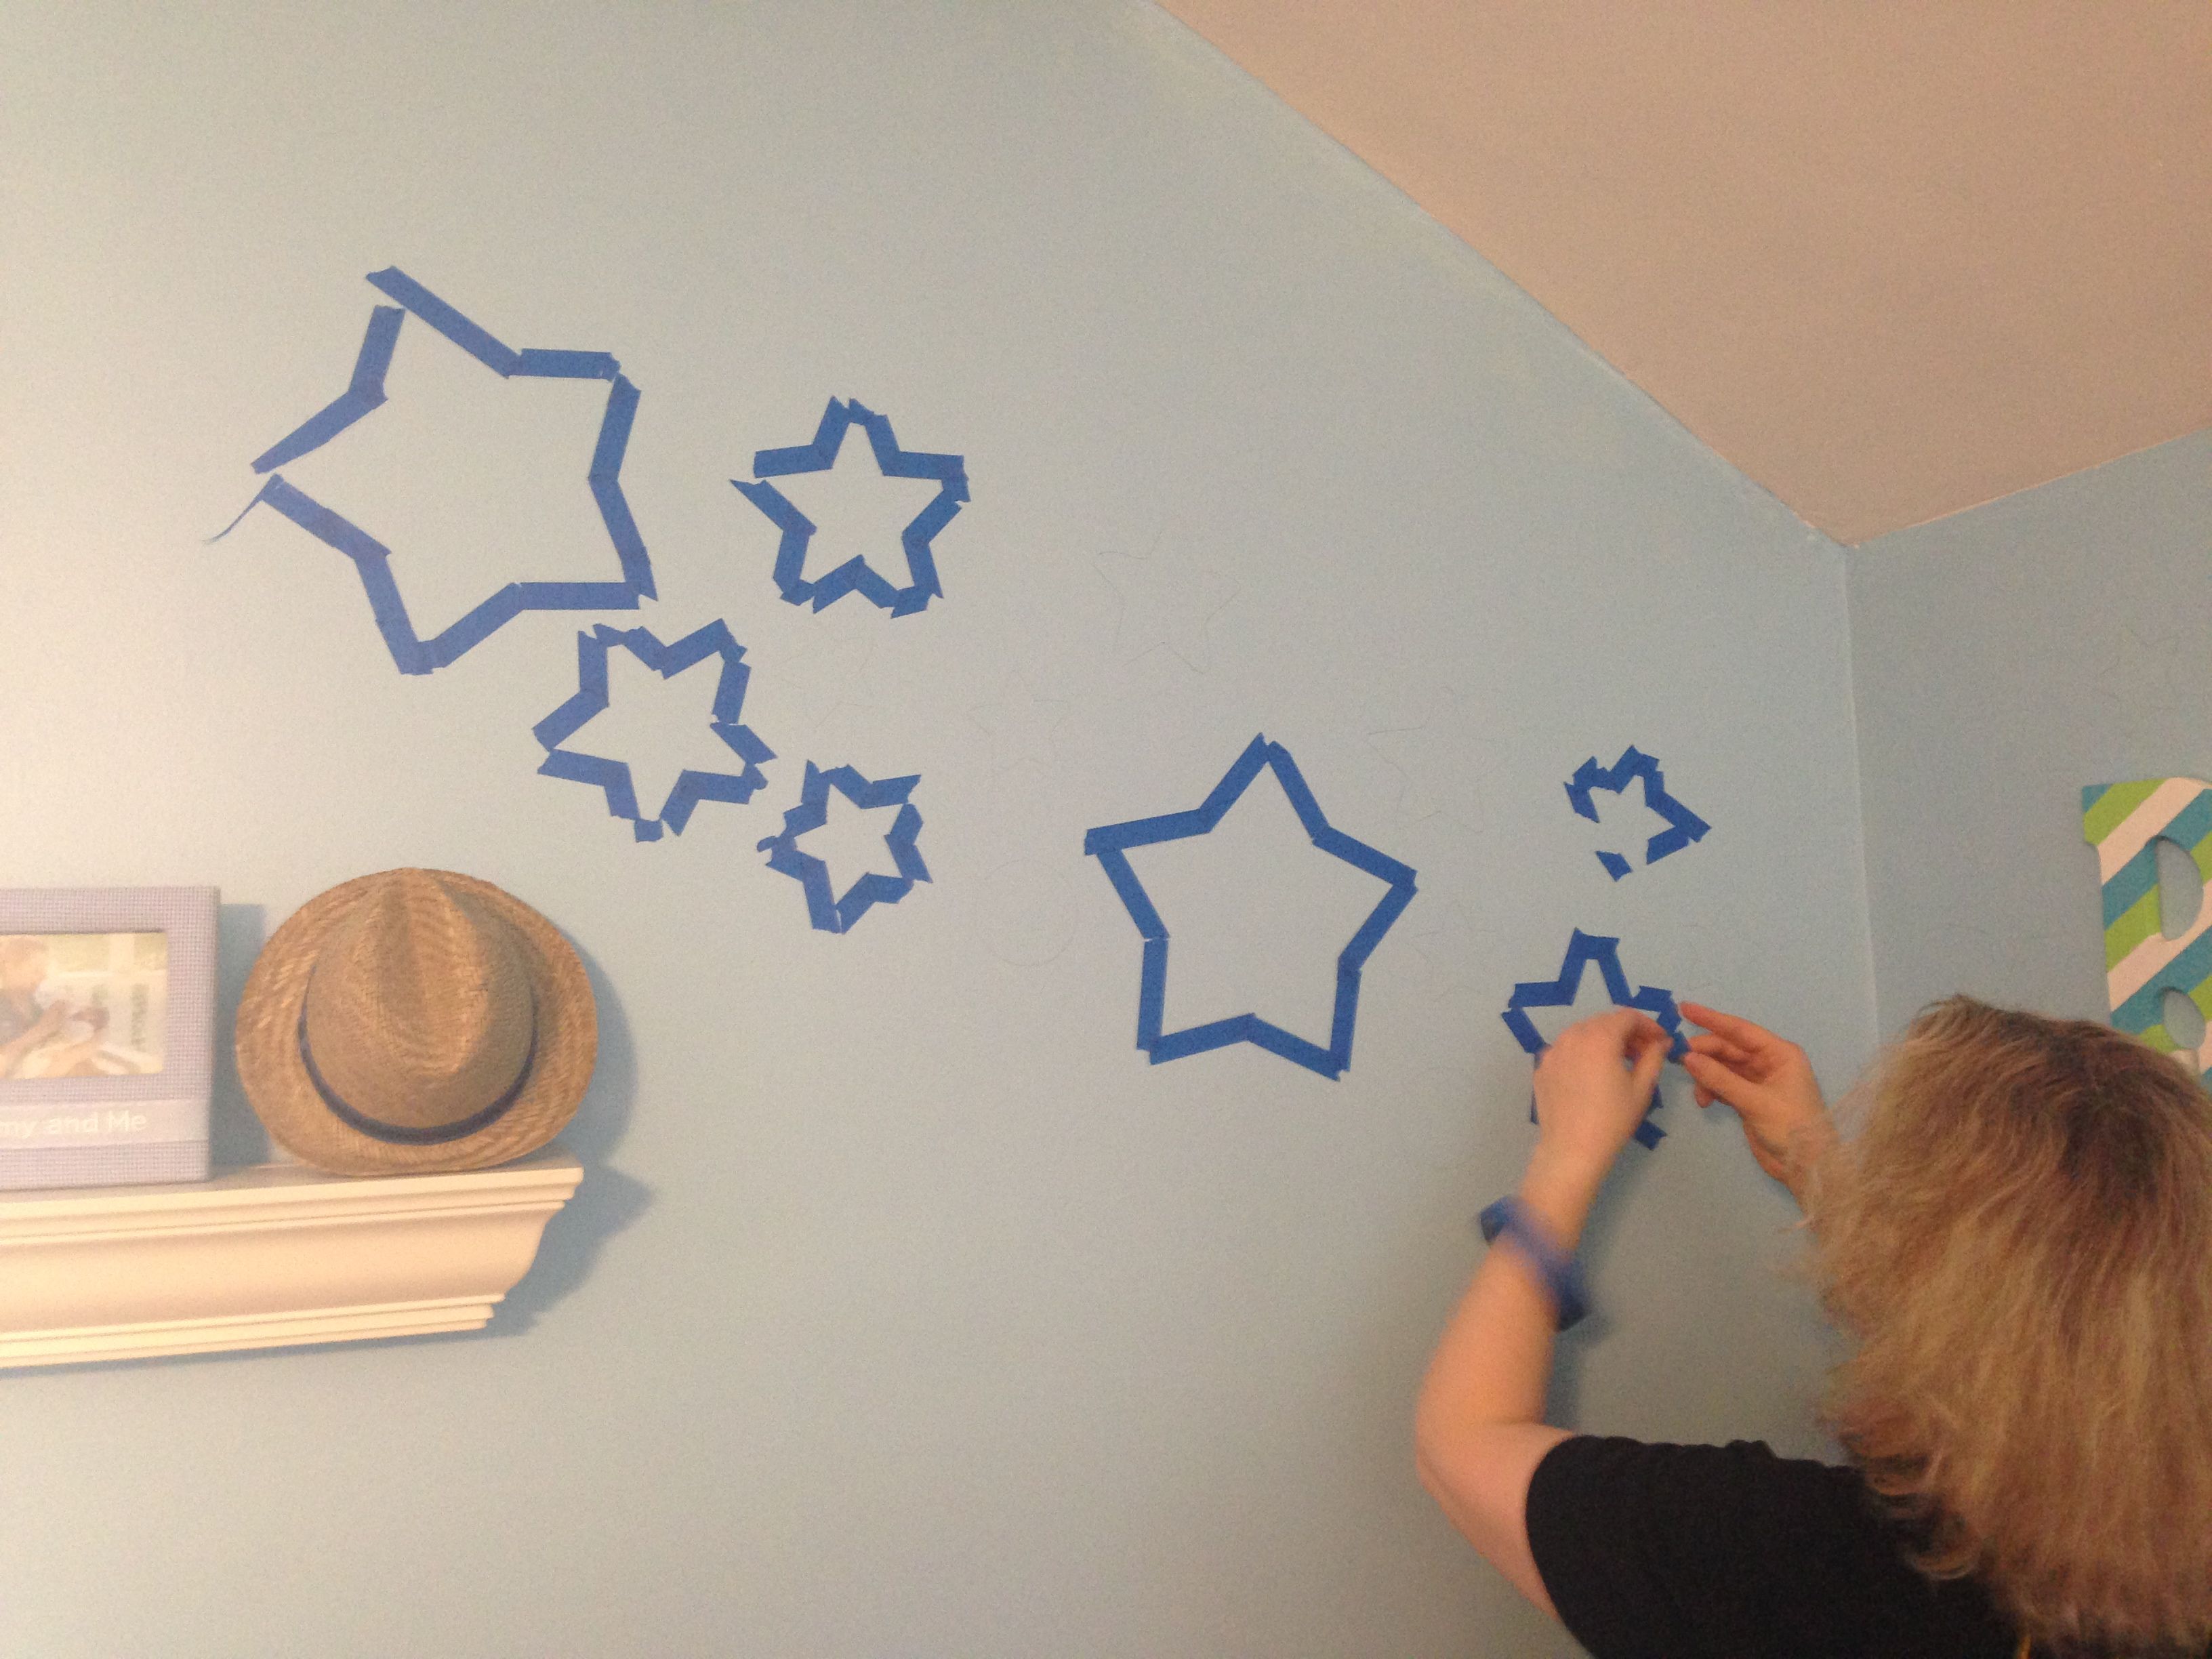 Tracing and then taping the stars was important